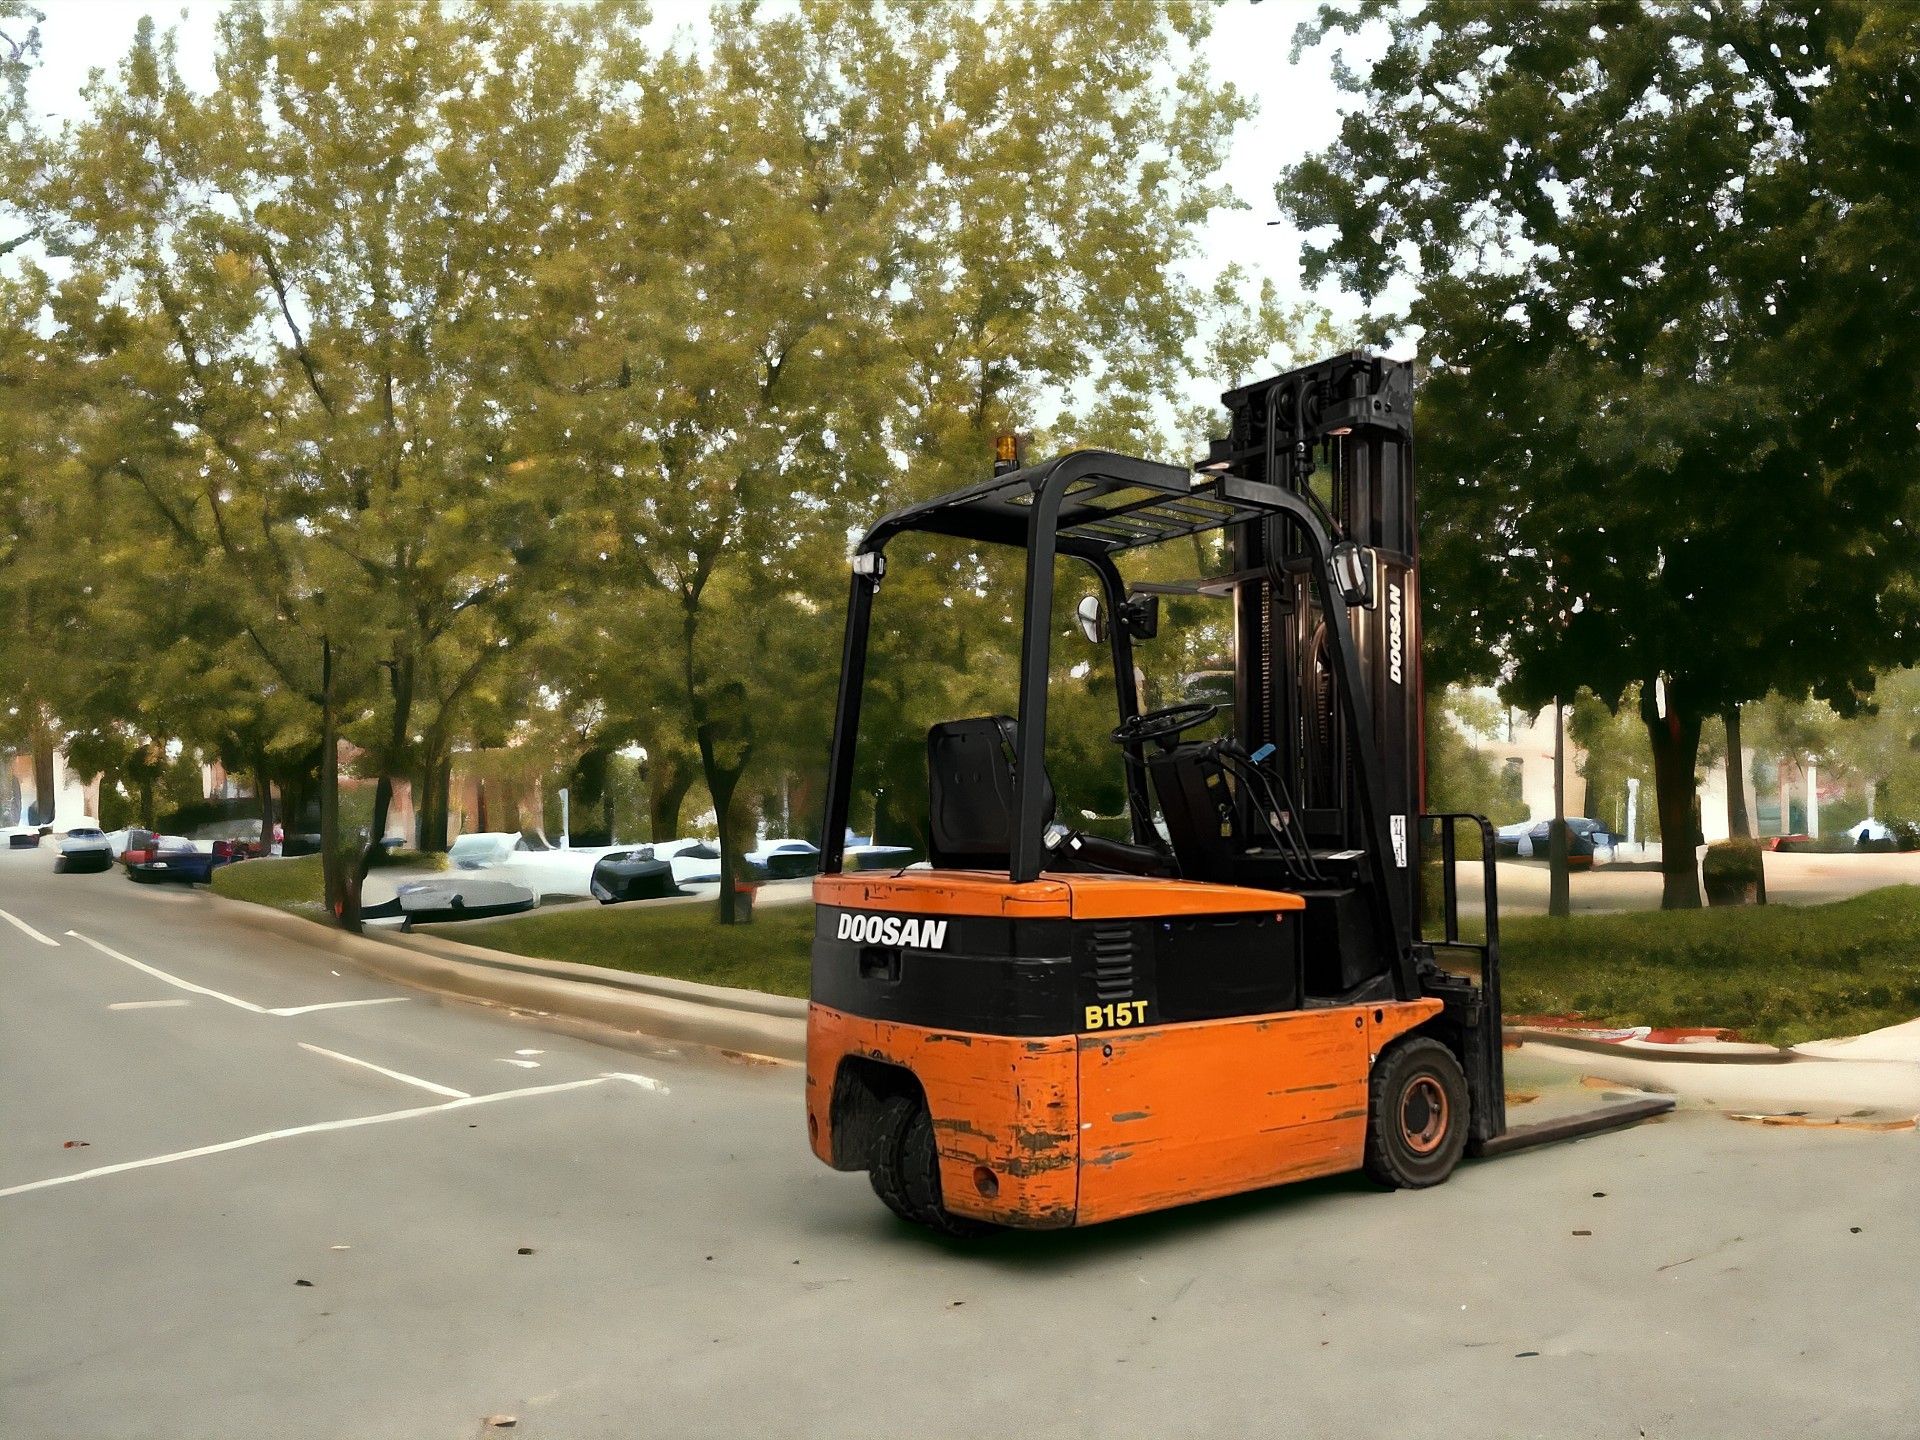 DAEWOO ELECTRIC 3-WHEEL FORKLIFT - MODEL B15T (1998) **(INCLUDES CHARGER)** - Image 6 of 6